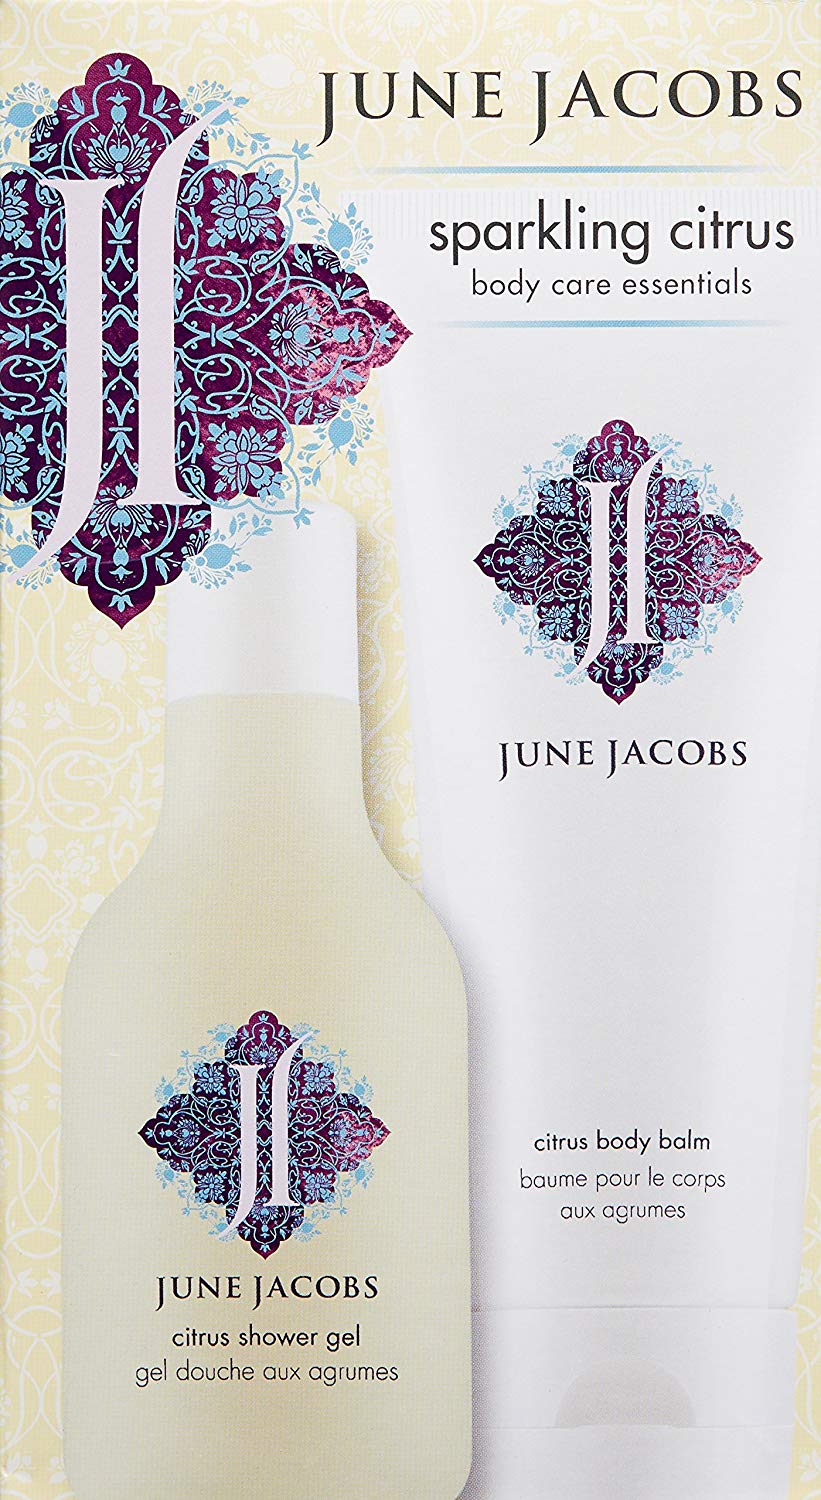 June Jacobs Sparkling Citrus Body Care Essentials (FREE SHIPPING) - image 1 of 1